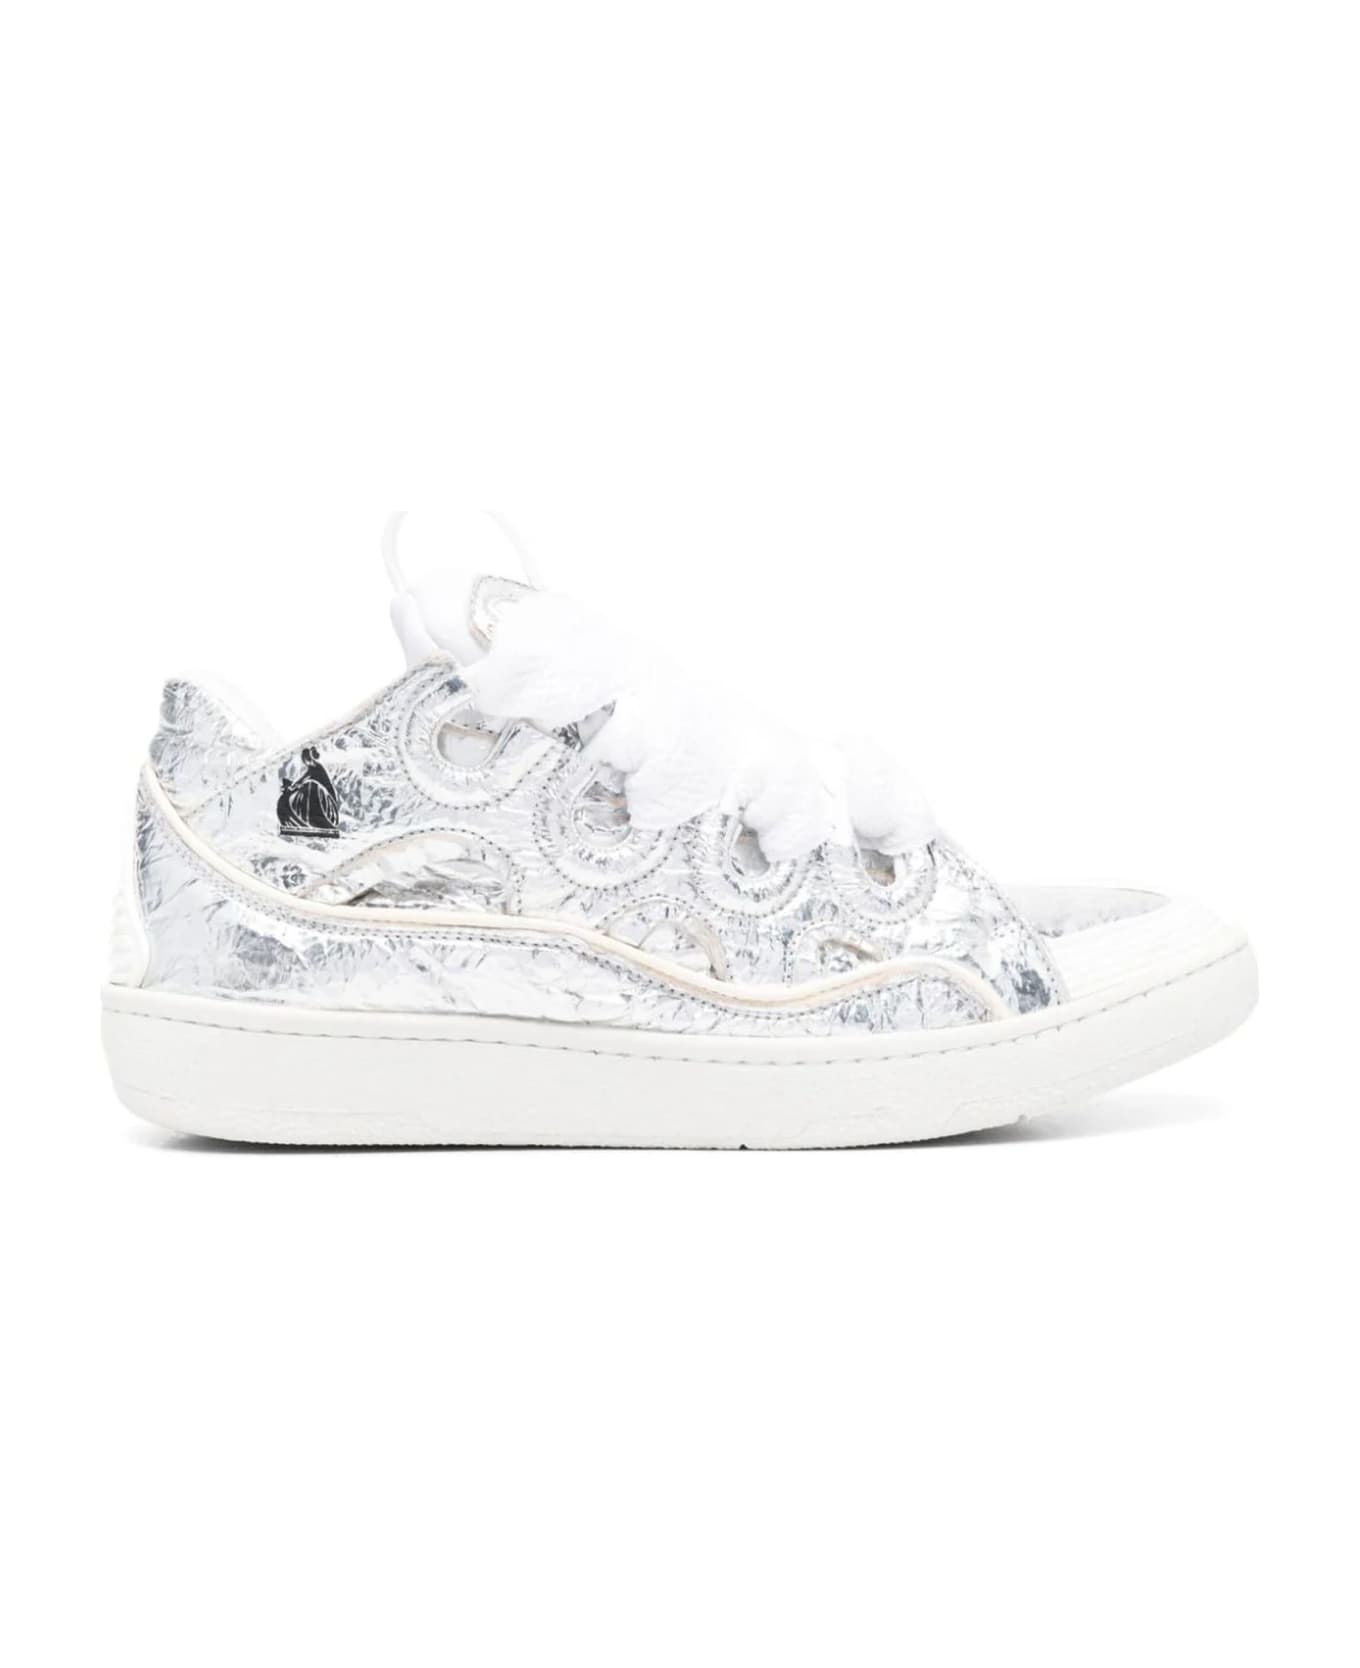 Lanvin Curb Sneakers In Crinkled Metallic Leather - Silver スニーカー